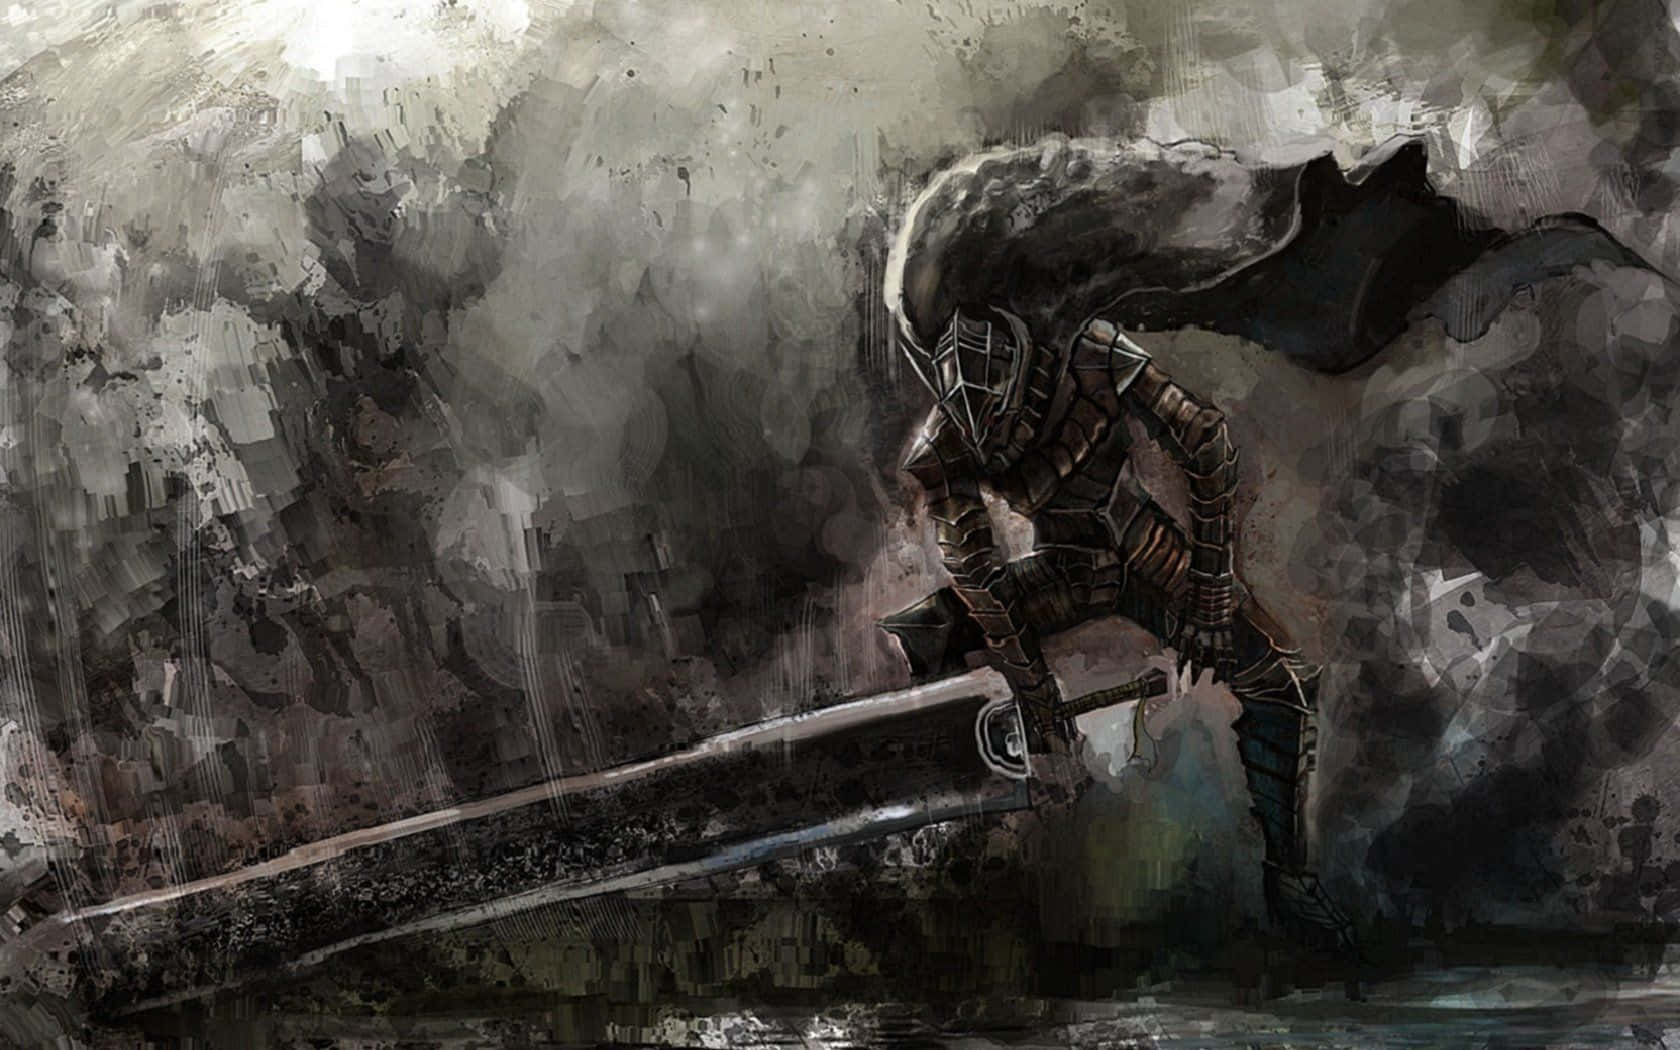 A look at the formidable power of Guts, the Black Swordsman.